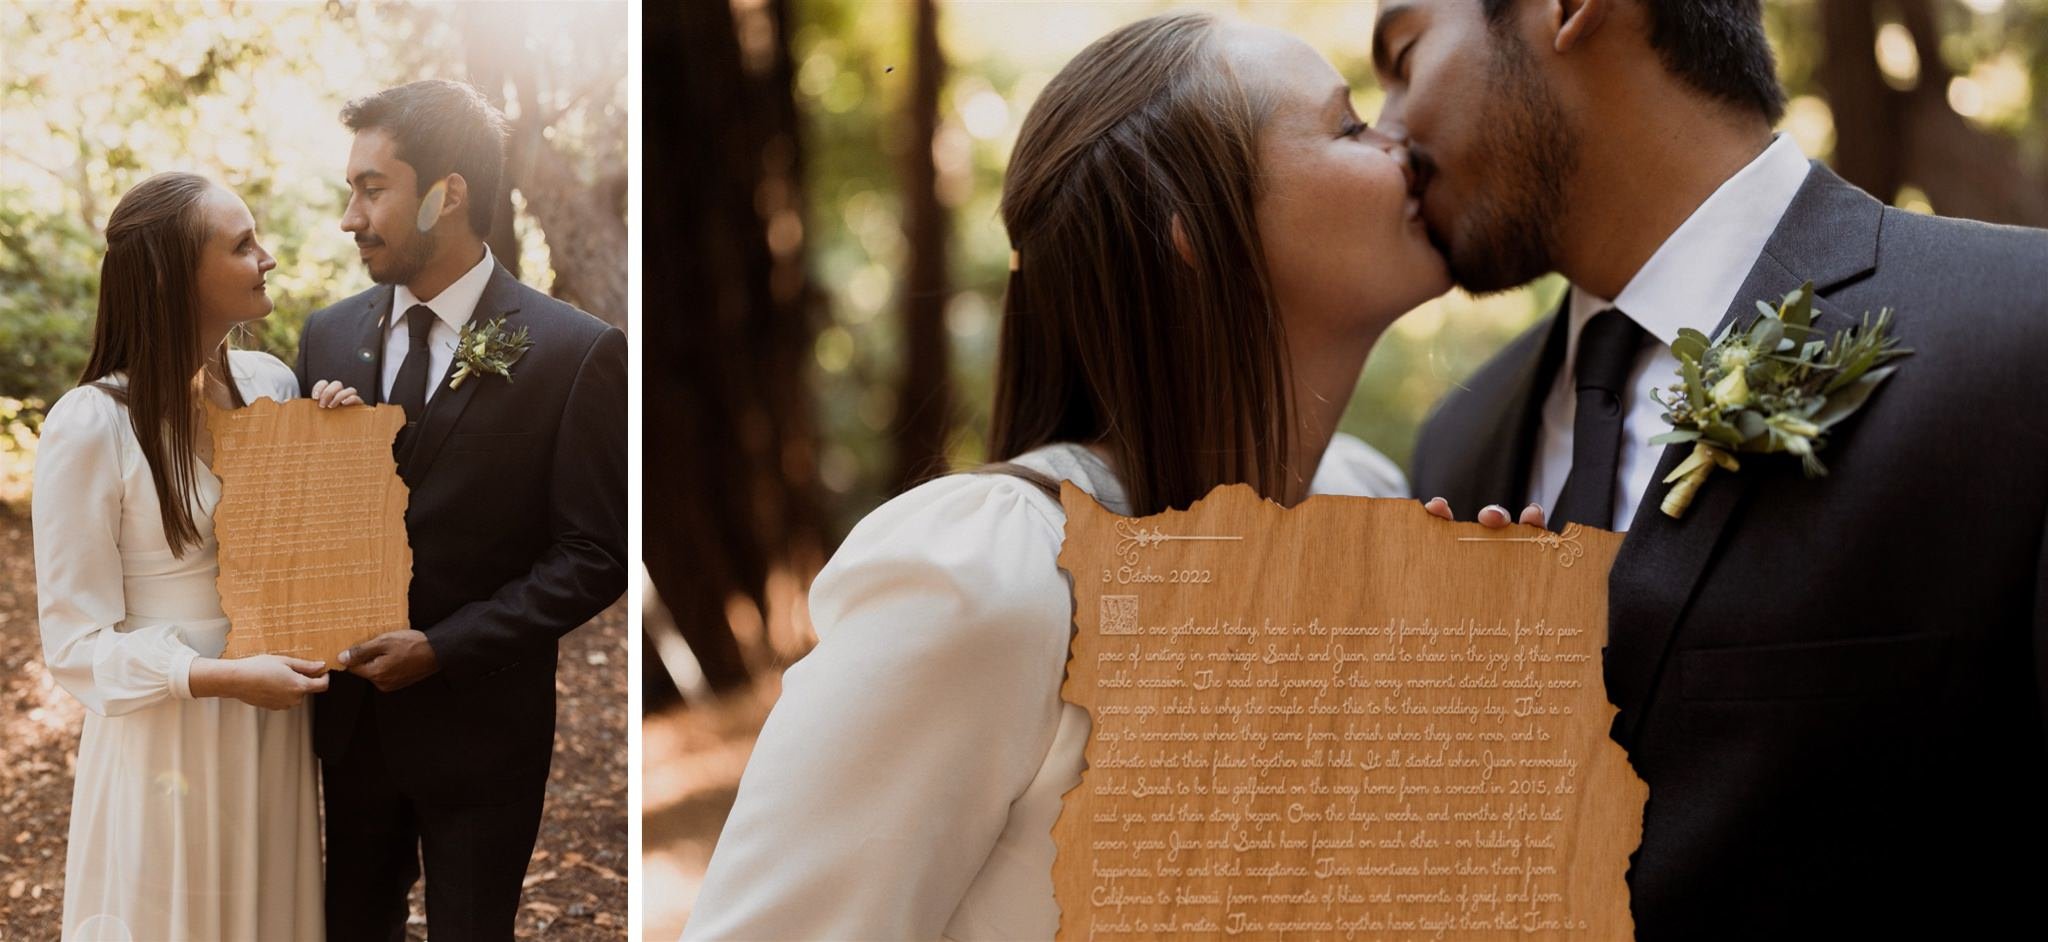 062_Two-Day Big Sur Redwoods Elopement with Family_Will Khoury Elopement Photographer.jpg